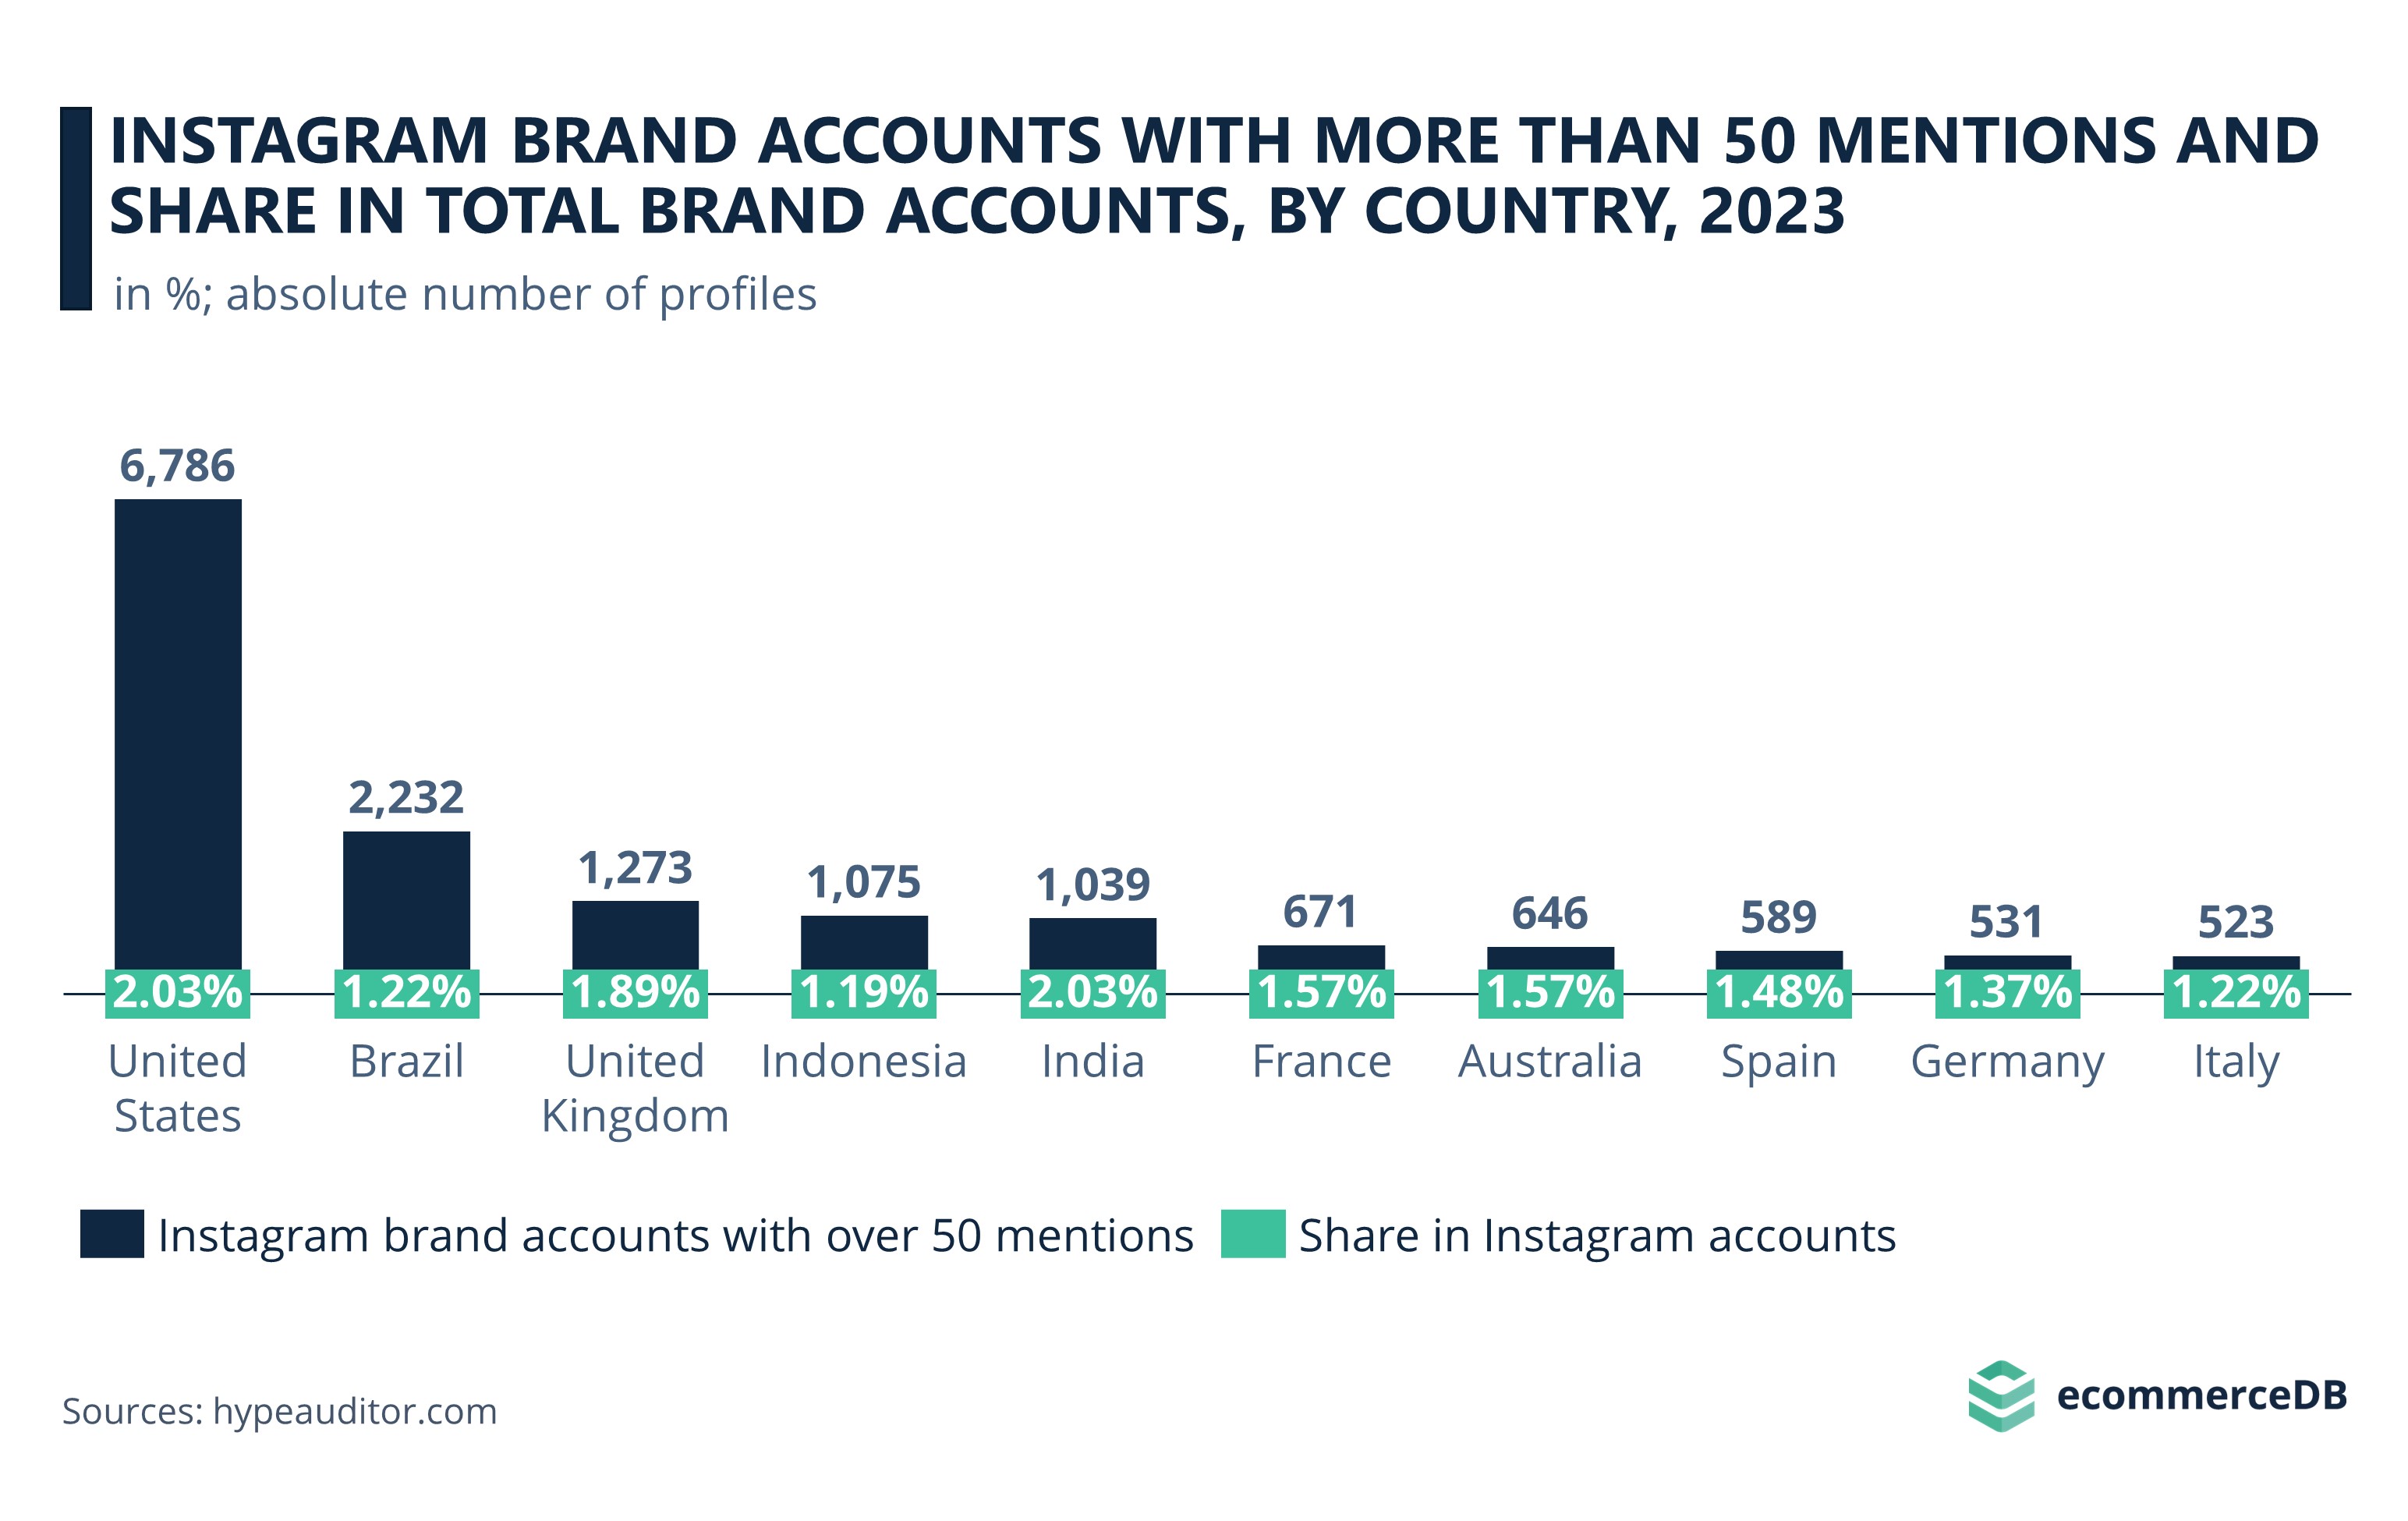 Instagram Brand Accounts with More Than 50 mentions and Share in Total Brand Accounts, by Country, 2023